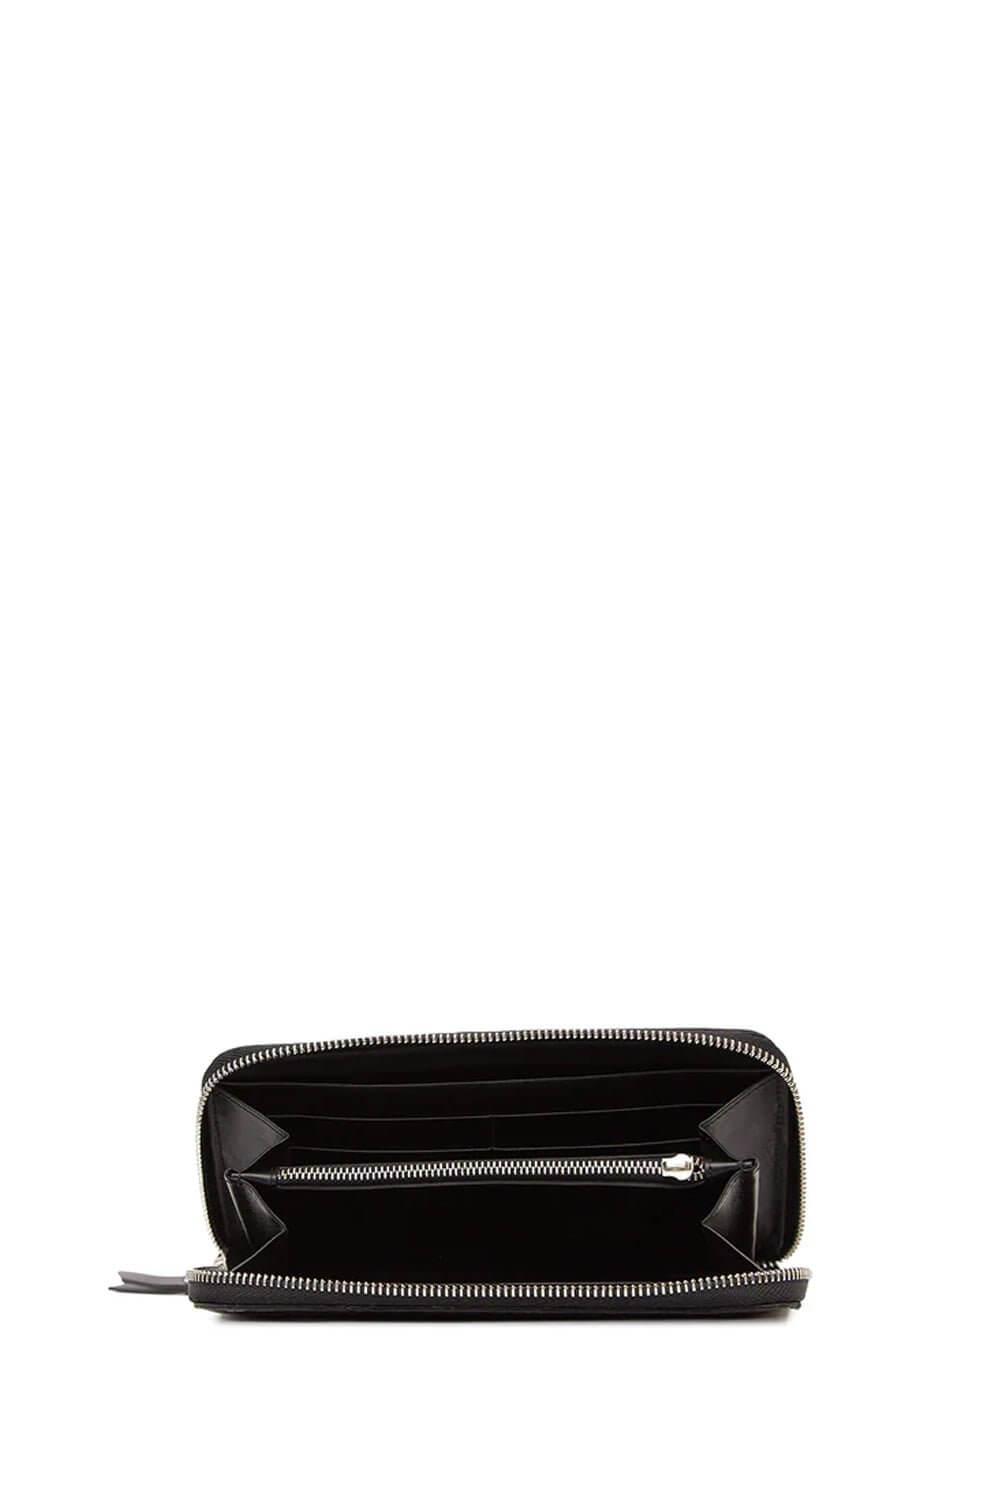 ZIP WALLET Black leather coin purse with CC holder. Lenght: 18 cm. Height: 10 cm. Cowskin. Made In Italy. HTC LOS ANGELES